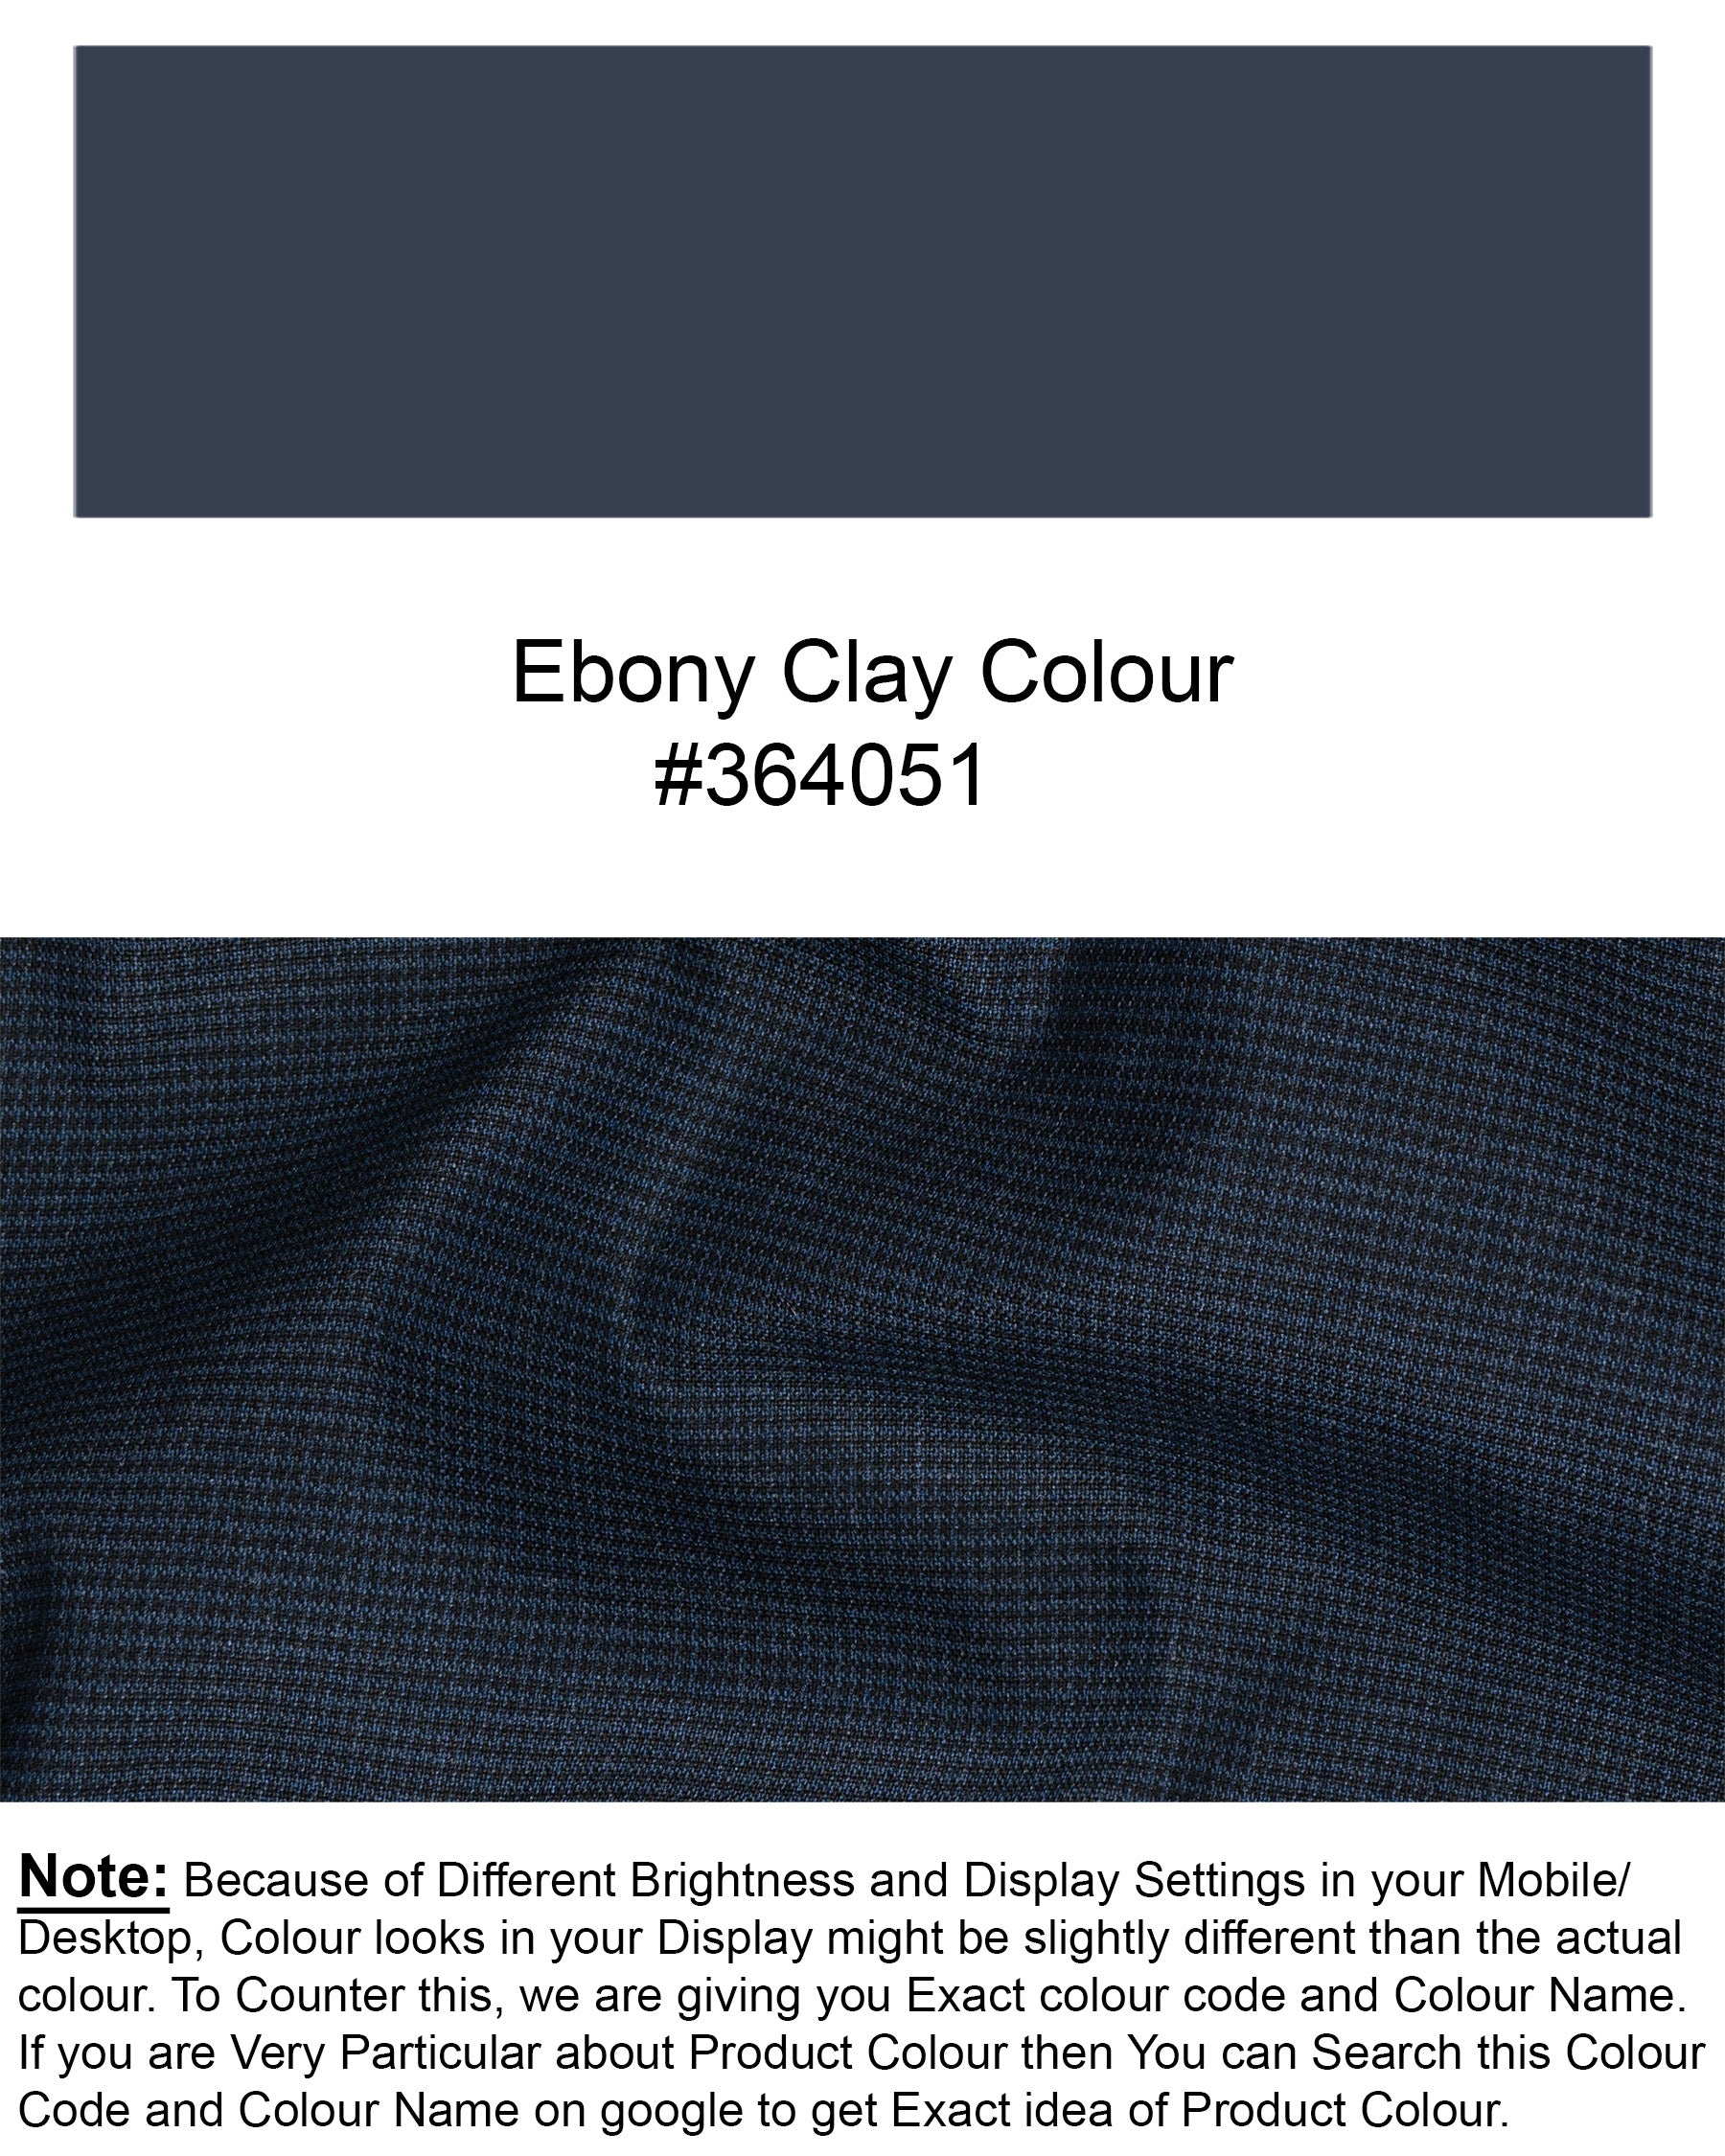 Ebony Clay Blue houndstooth Wool Rich Double Breasted Blazer BL1593-DB-36, BL1593-DB-38, BL1593-DB-40, BL1593-DB-42, BL1593-DB-44, BL1593-DB-46, BL1593-DB-48, BL1593-DB-50, BL1593-DB-52, BL1593-DB-54, BL1593-DB-56, BL1593-DB-58, BL1593-DB-60